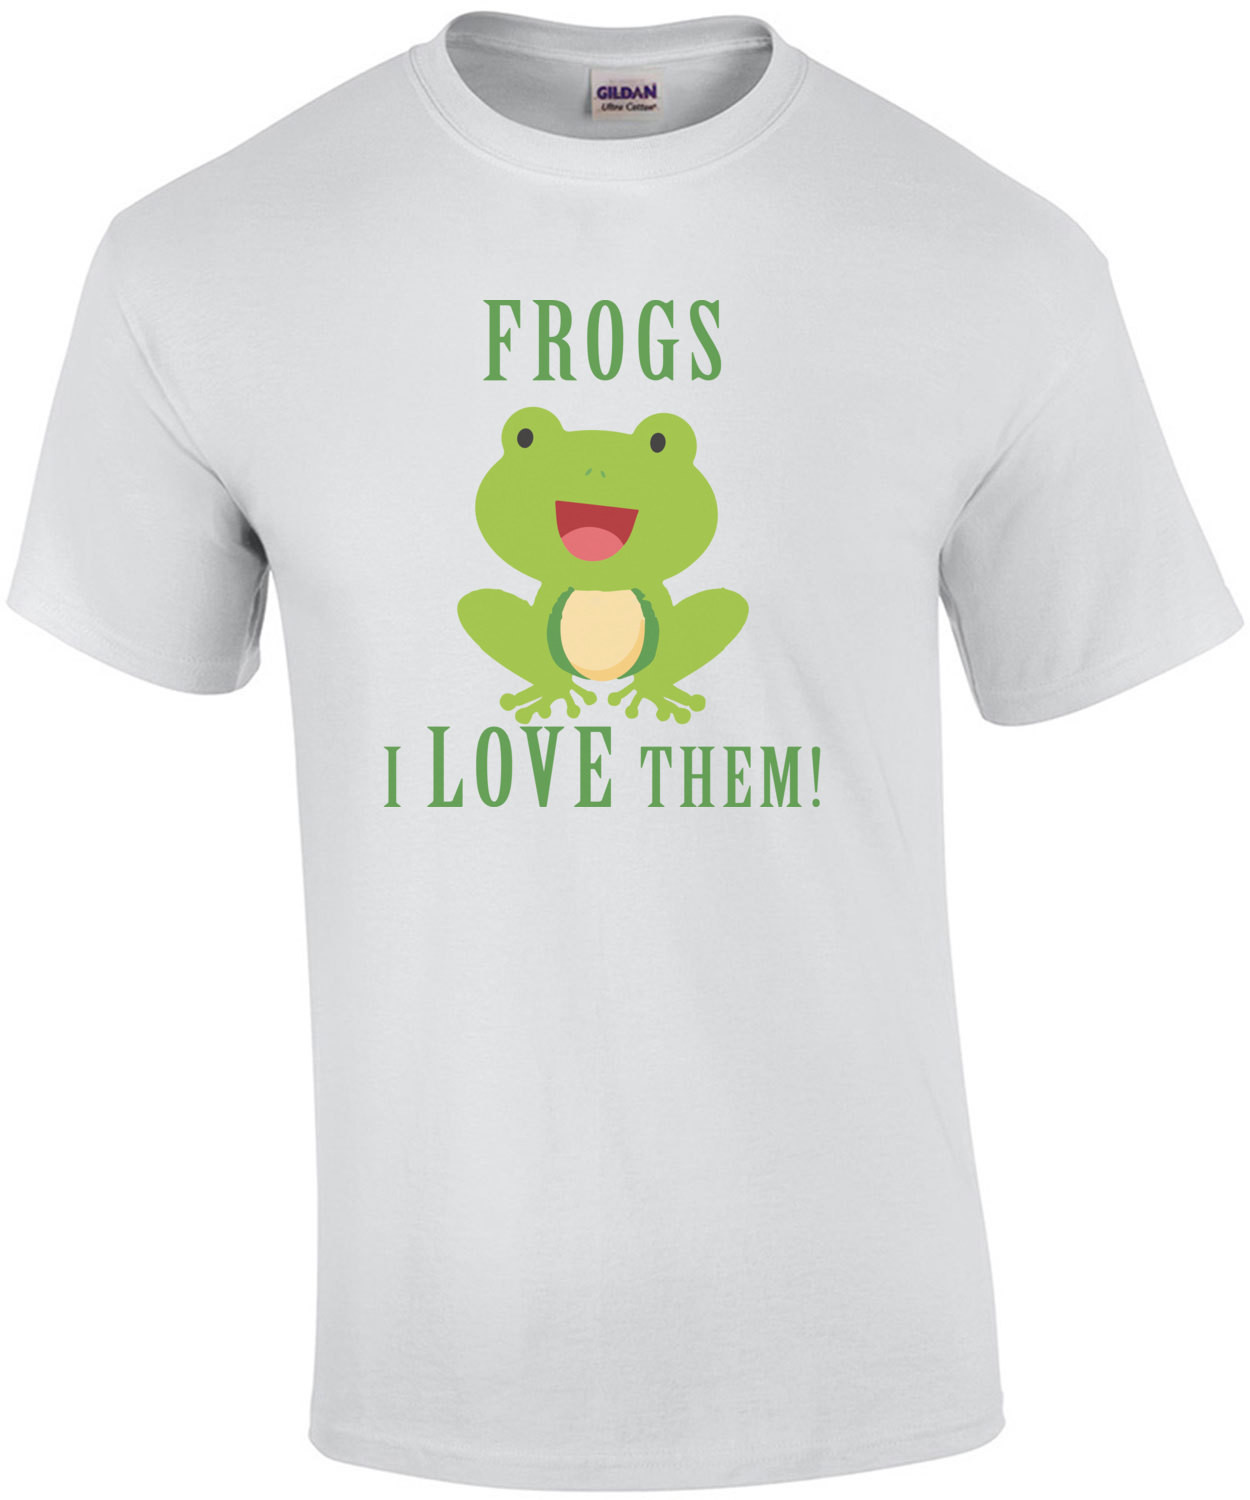 Frogs I love them! Frog T-Shirt